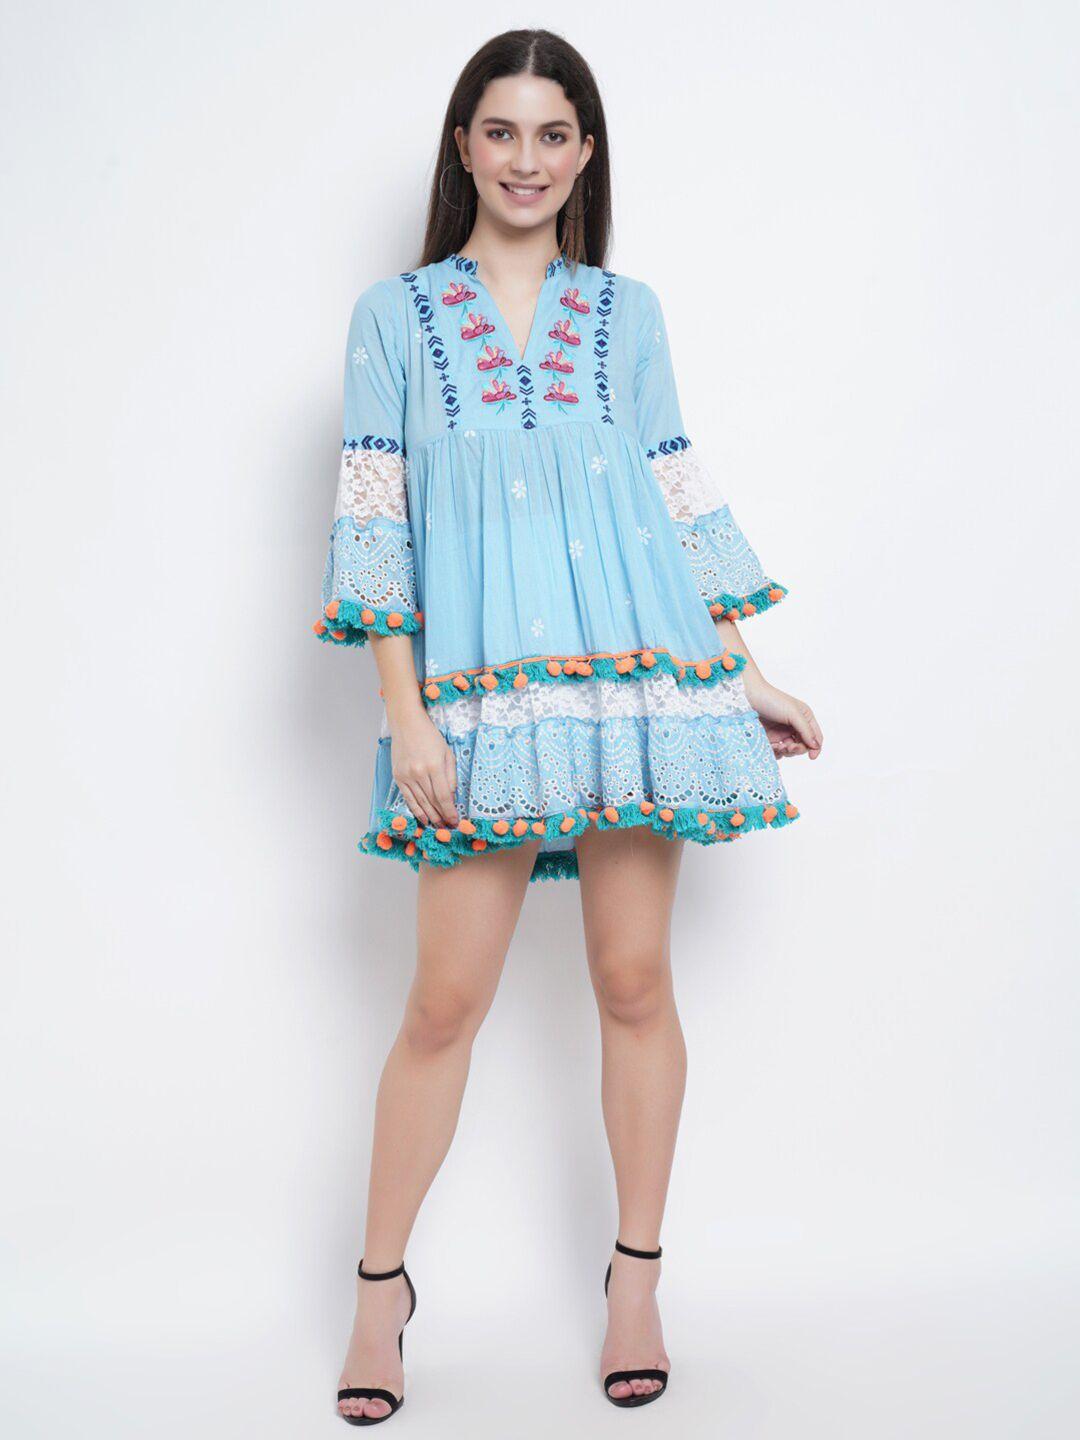 ix impression turquoise blue & white floral embroidered dress